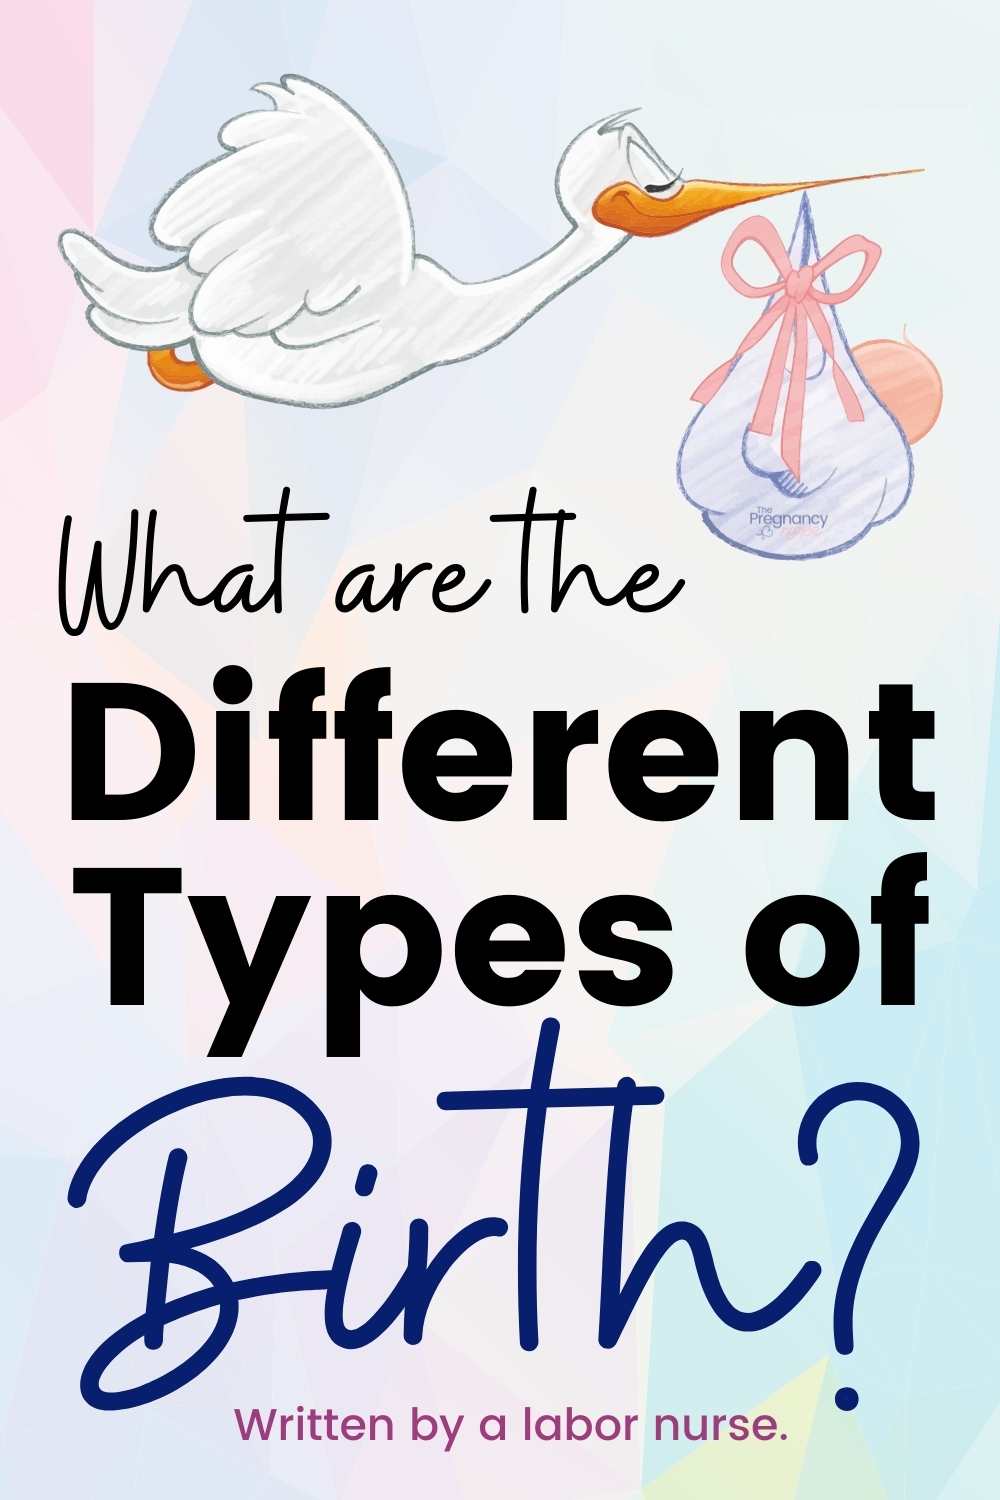 People define different types of childbirth in many ways. Today I watned to define the basic types that most people use -- just so you understand where they are coming from. Please remember that all of these different "types of childbirth" are all childbirth. There is no reason to differentiate them as giving birth and "not giving birth". Birth comes in all shapes and sizes, and for that, I'm grateful.